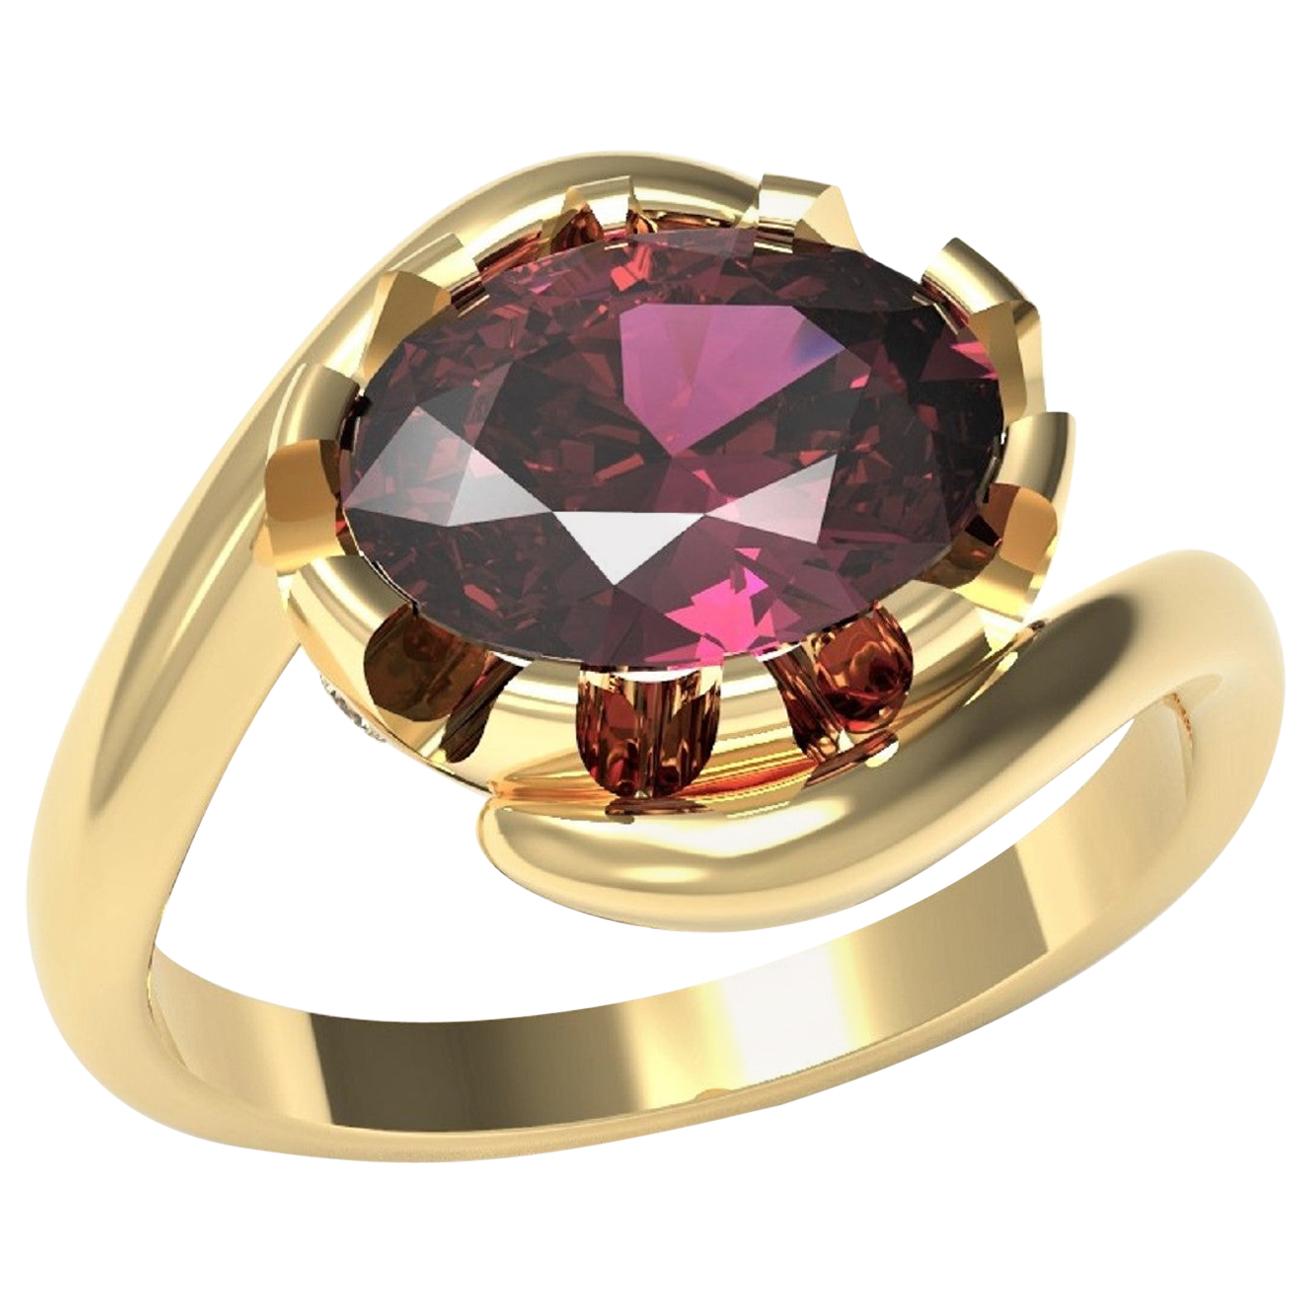 Rhodolite Ring

The exquisite 18 carat  yellow gold ring features a stunning rhodolite garnet and four round brilliant cut diamonds. The ring made in 18 carat yellow gold.

Oval faceted rhodolite garnet: intense reddish pink colour, 2.05 Carat
Round